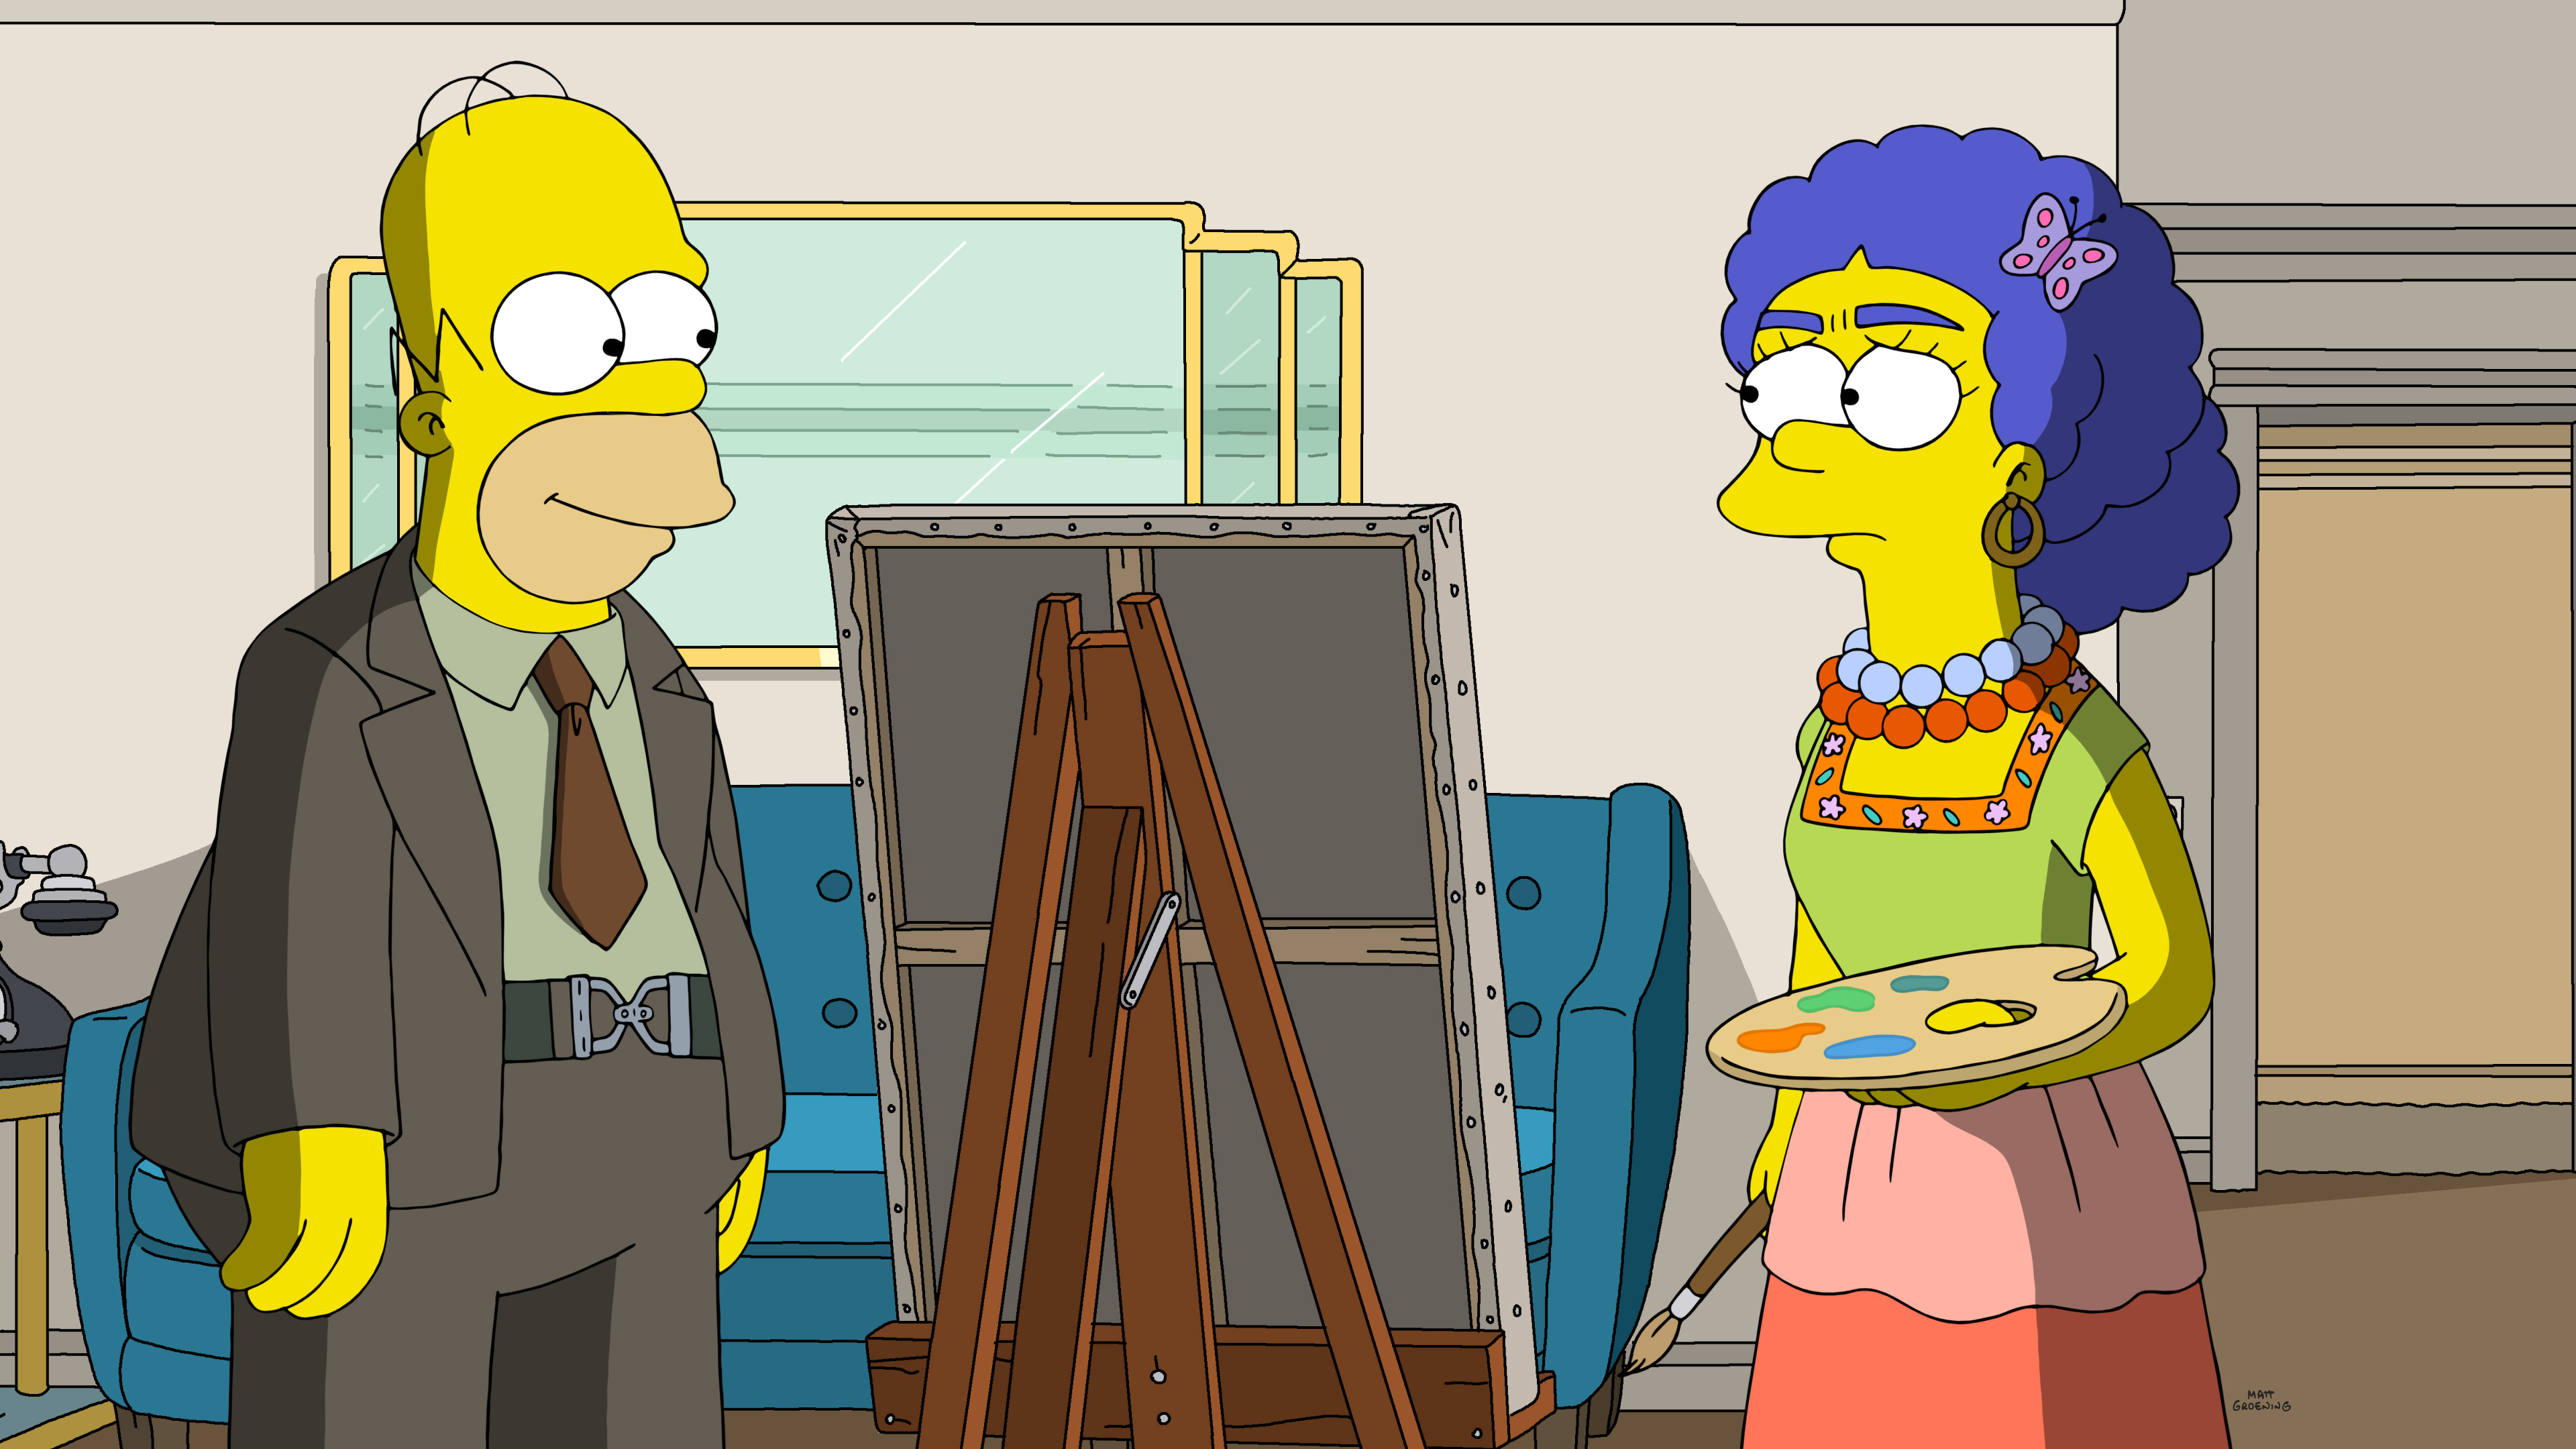 File:Now Museum, Now You Don't promo 7.png - Wikisimpsons, t